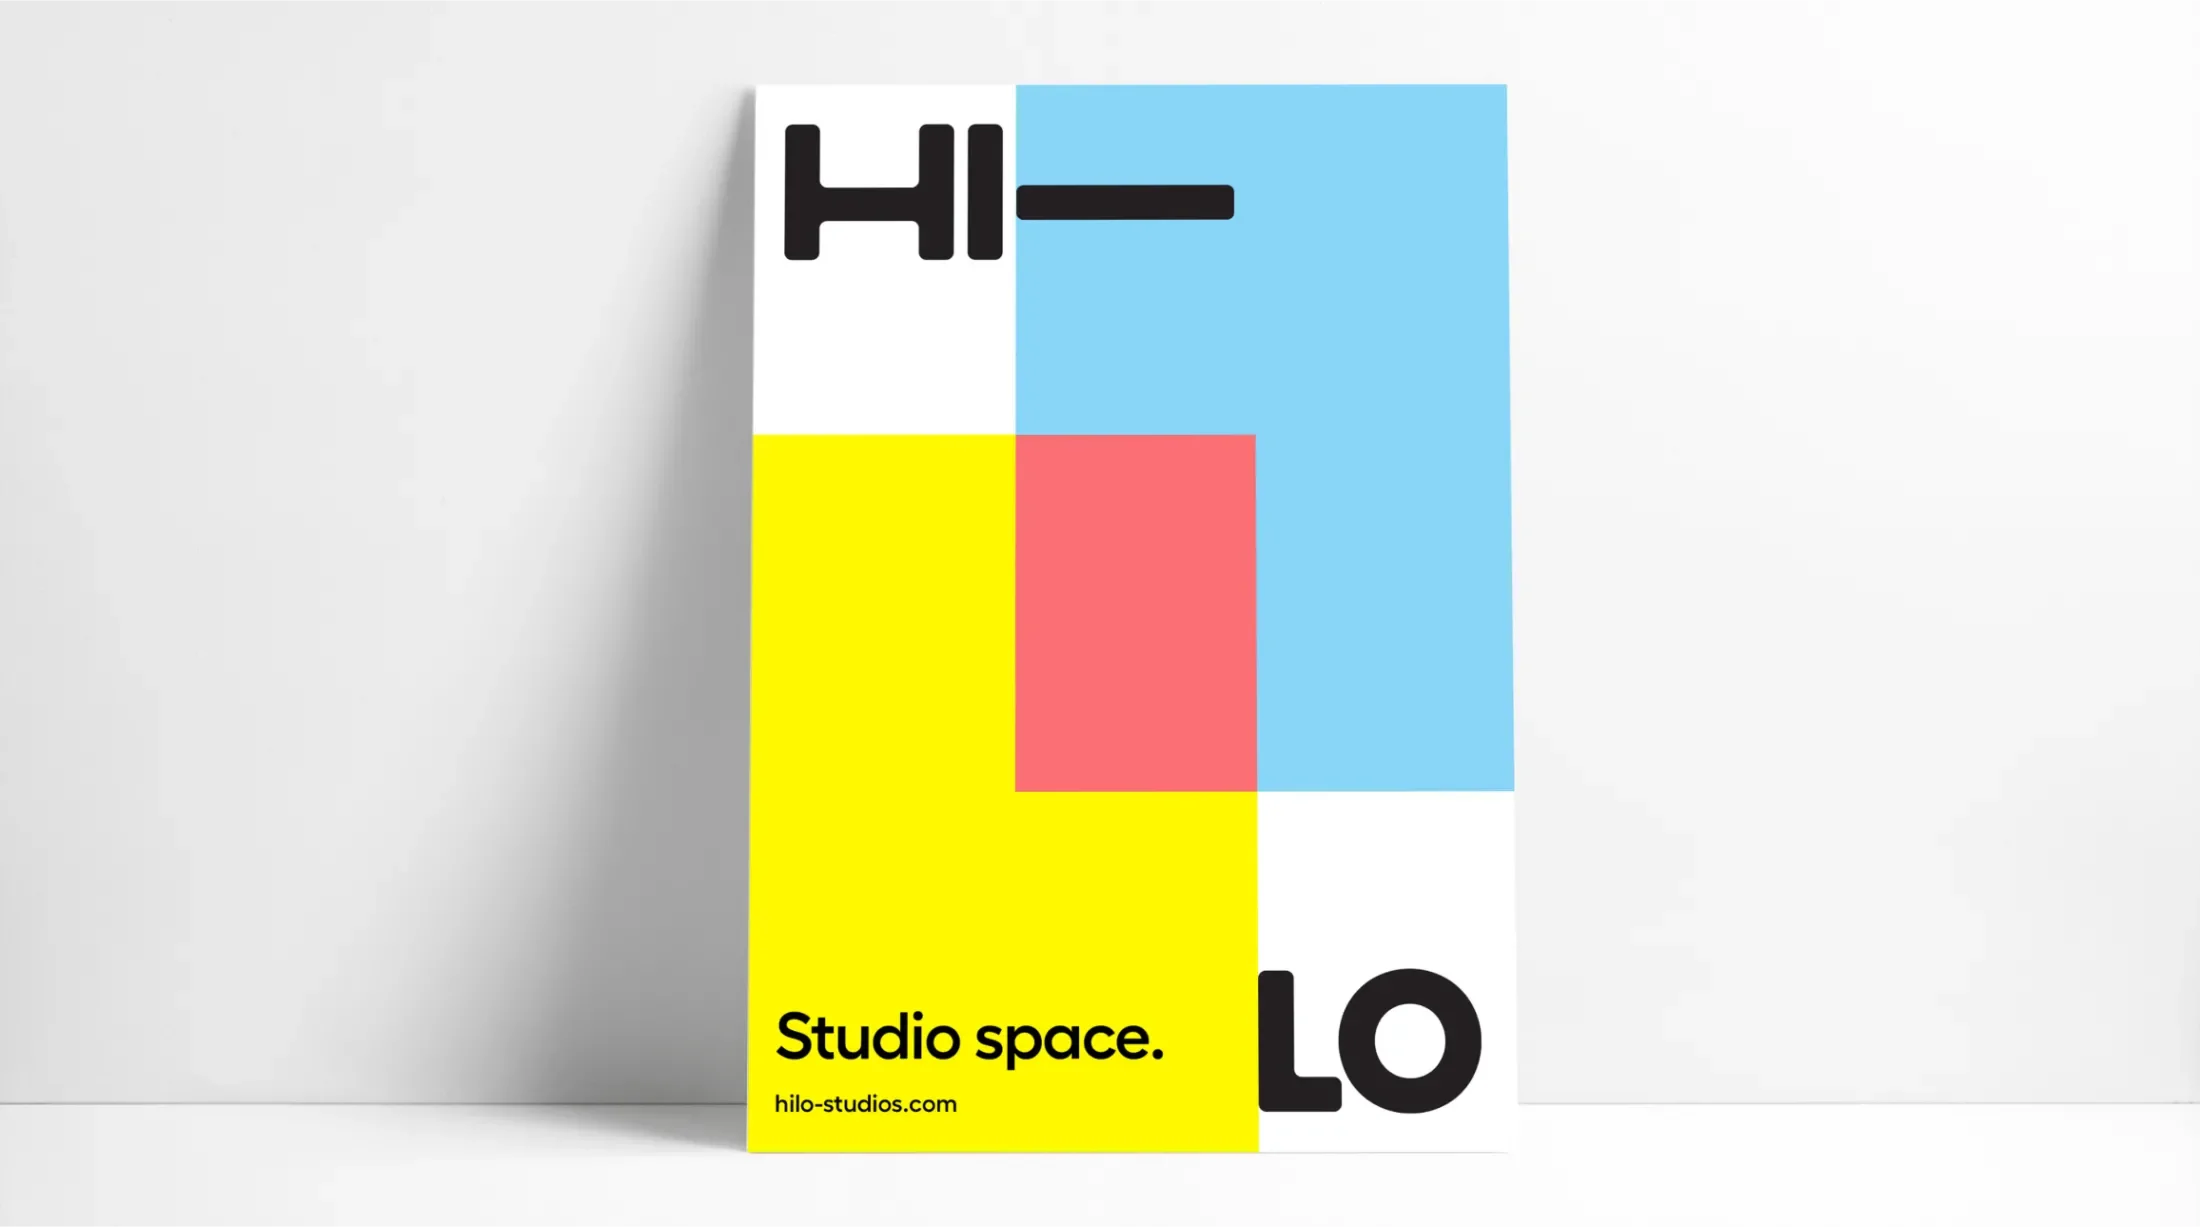 Hi-Lo poster with two overlapping rectangles in the brand colors with the caption "Studio space."